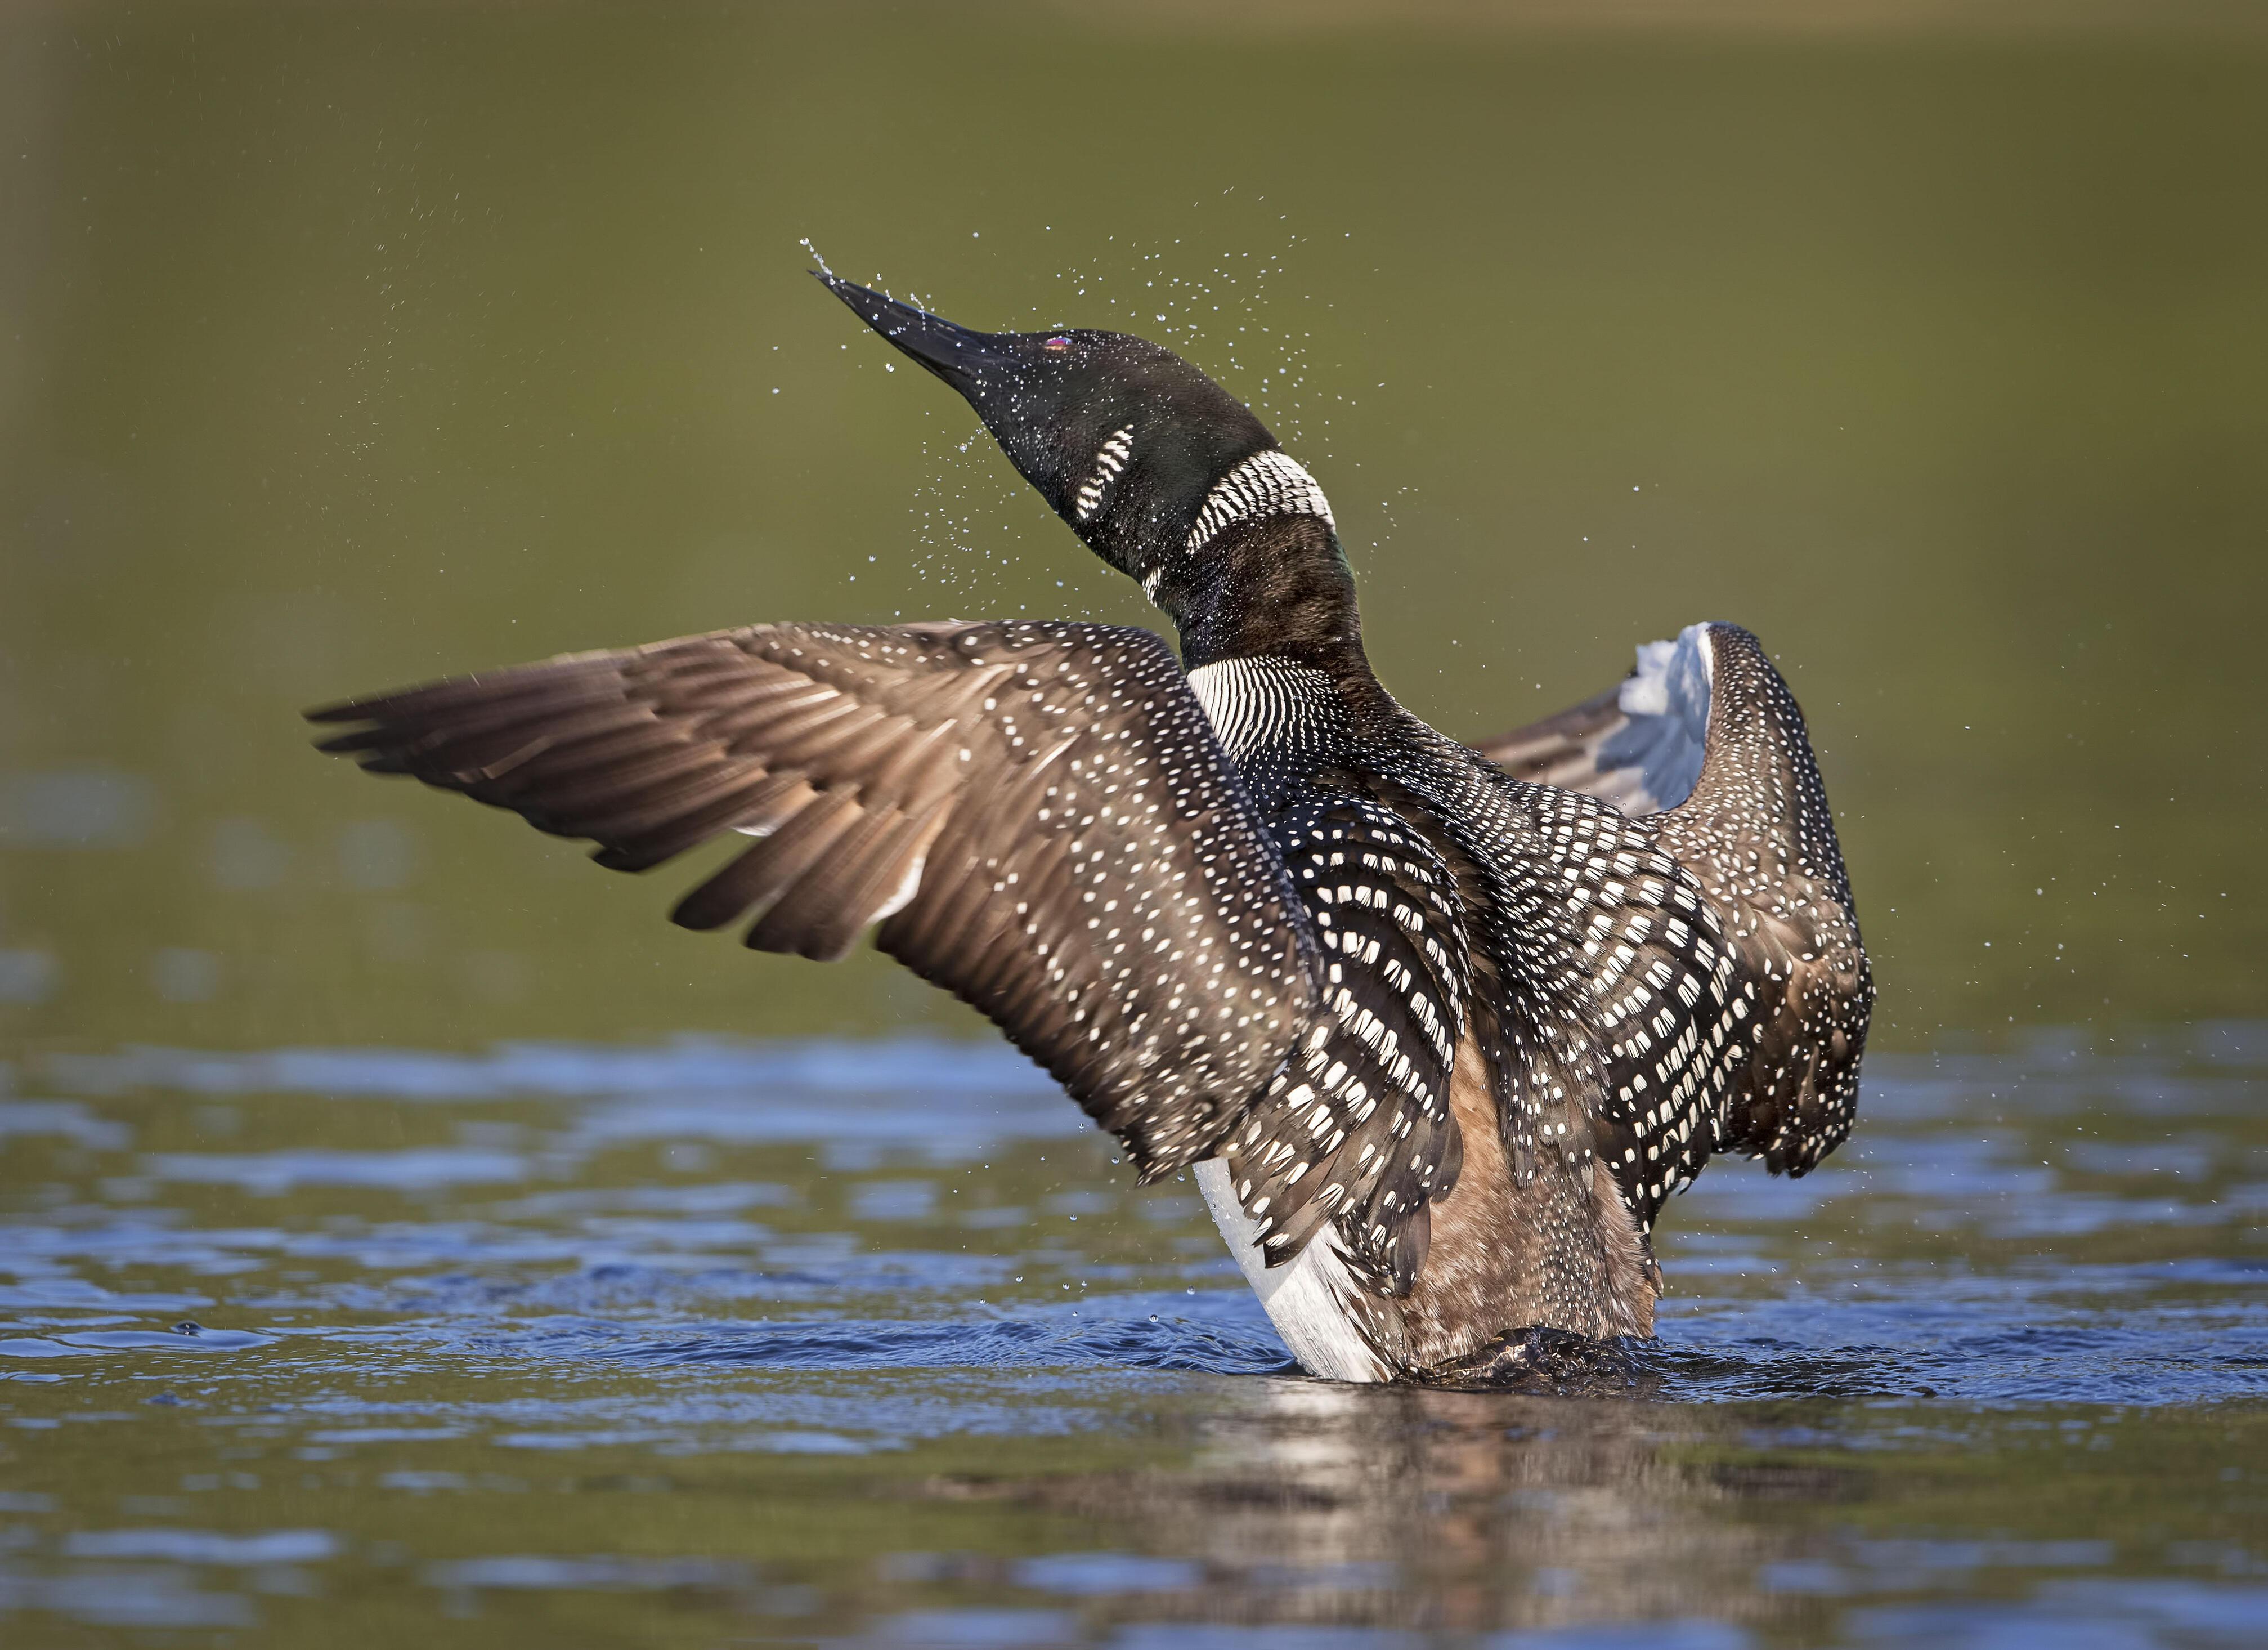 A Common Loon shakes the water free after diving deep in a Northern Michigan lake.